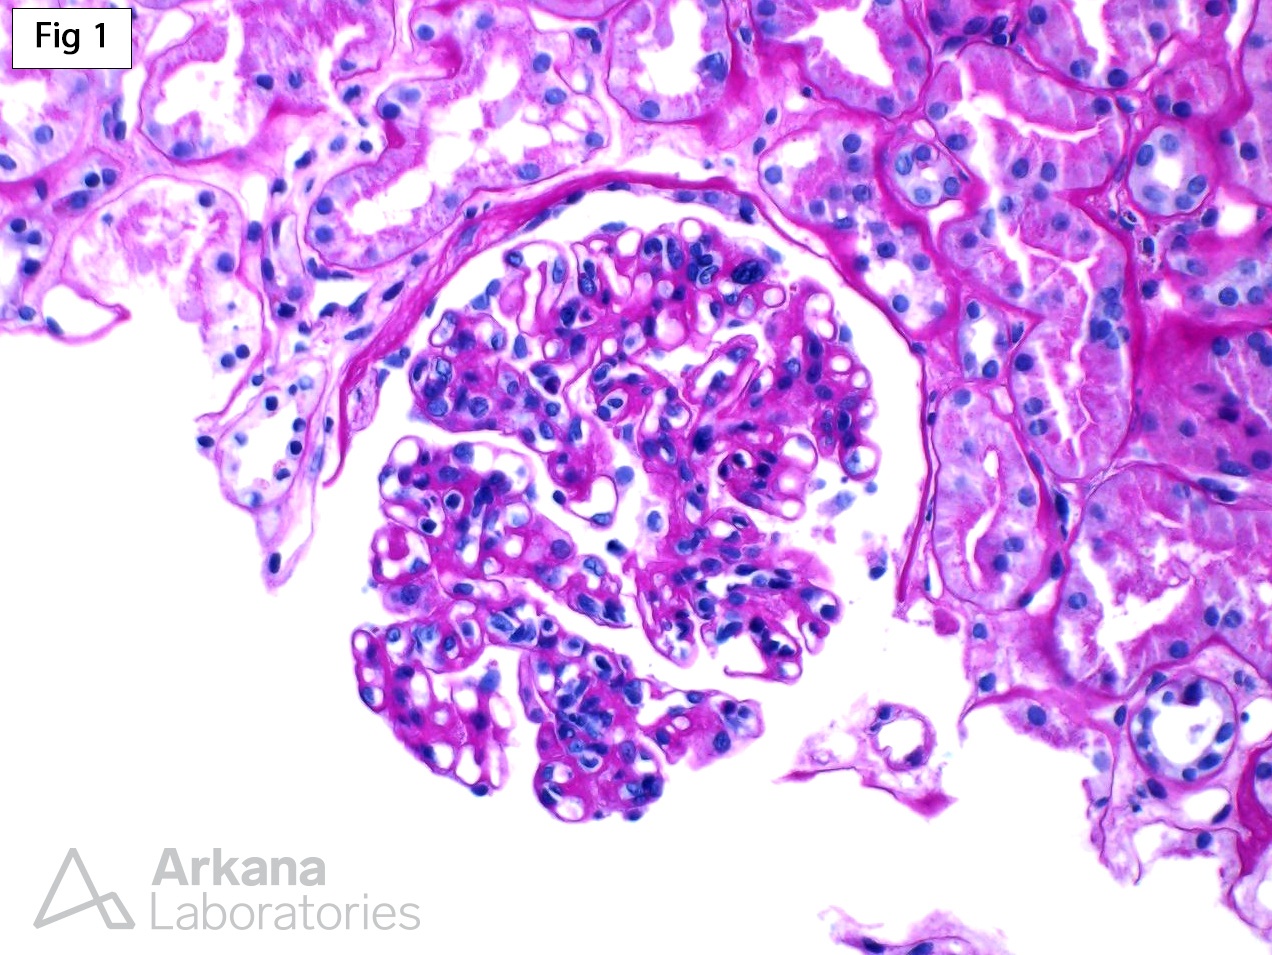 mild endocapillary hypercellularity with rare double contour formation of the capillary loops, Proliferative Glomerulonephritis with Monoclonal IgG Deposits